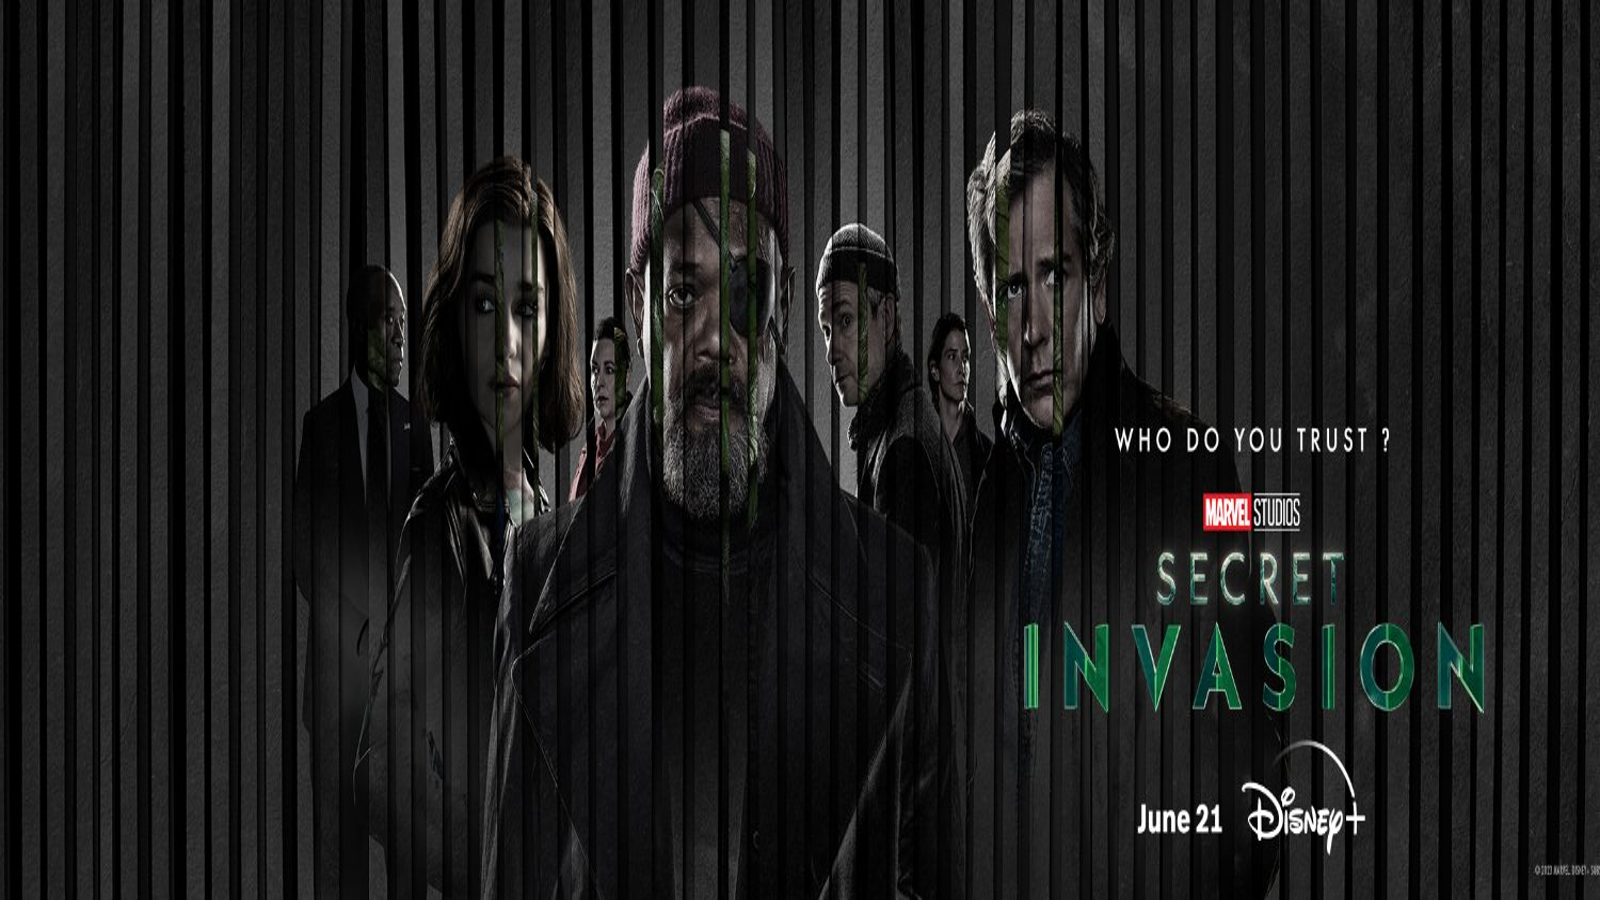 Studio fires back at critics of AI usage in Secret Invasion opening credits